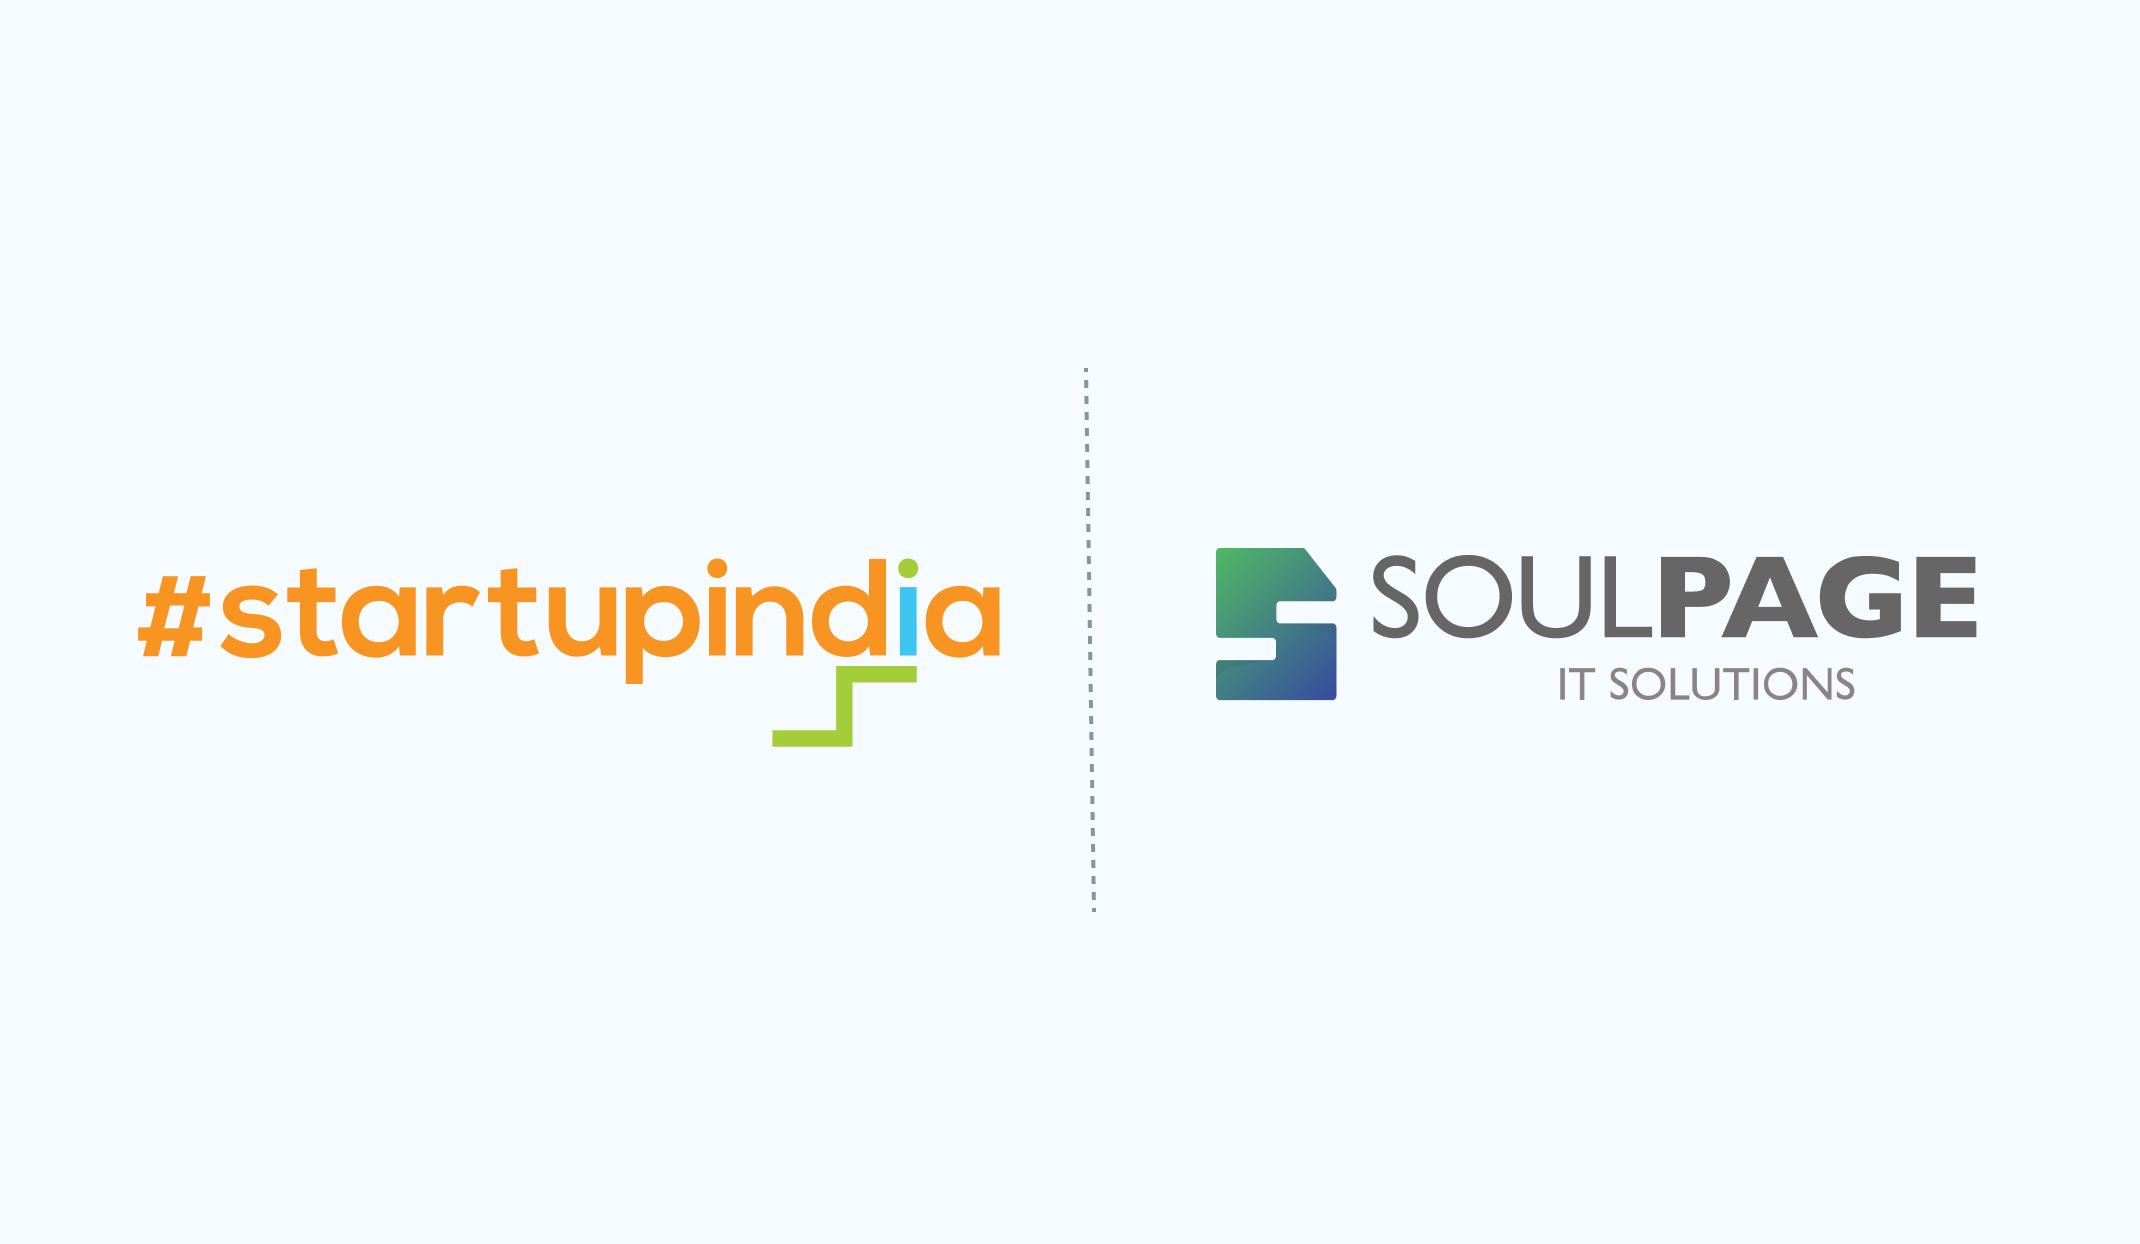 Soulpage Is Recognized As a Potential “Startup” By DPIIT, Govt. of India